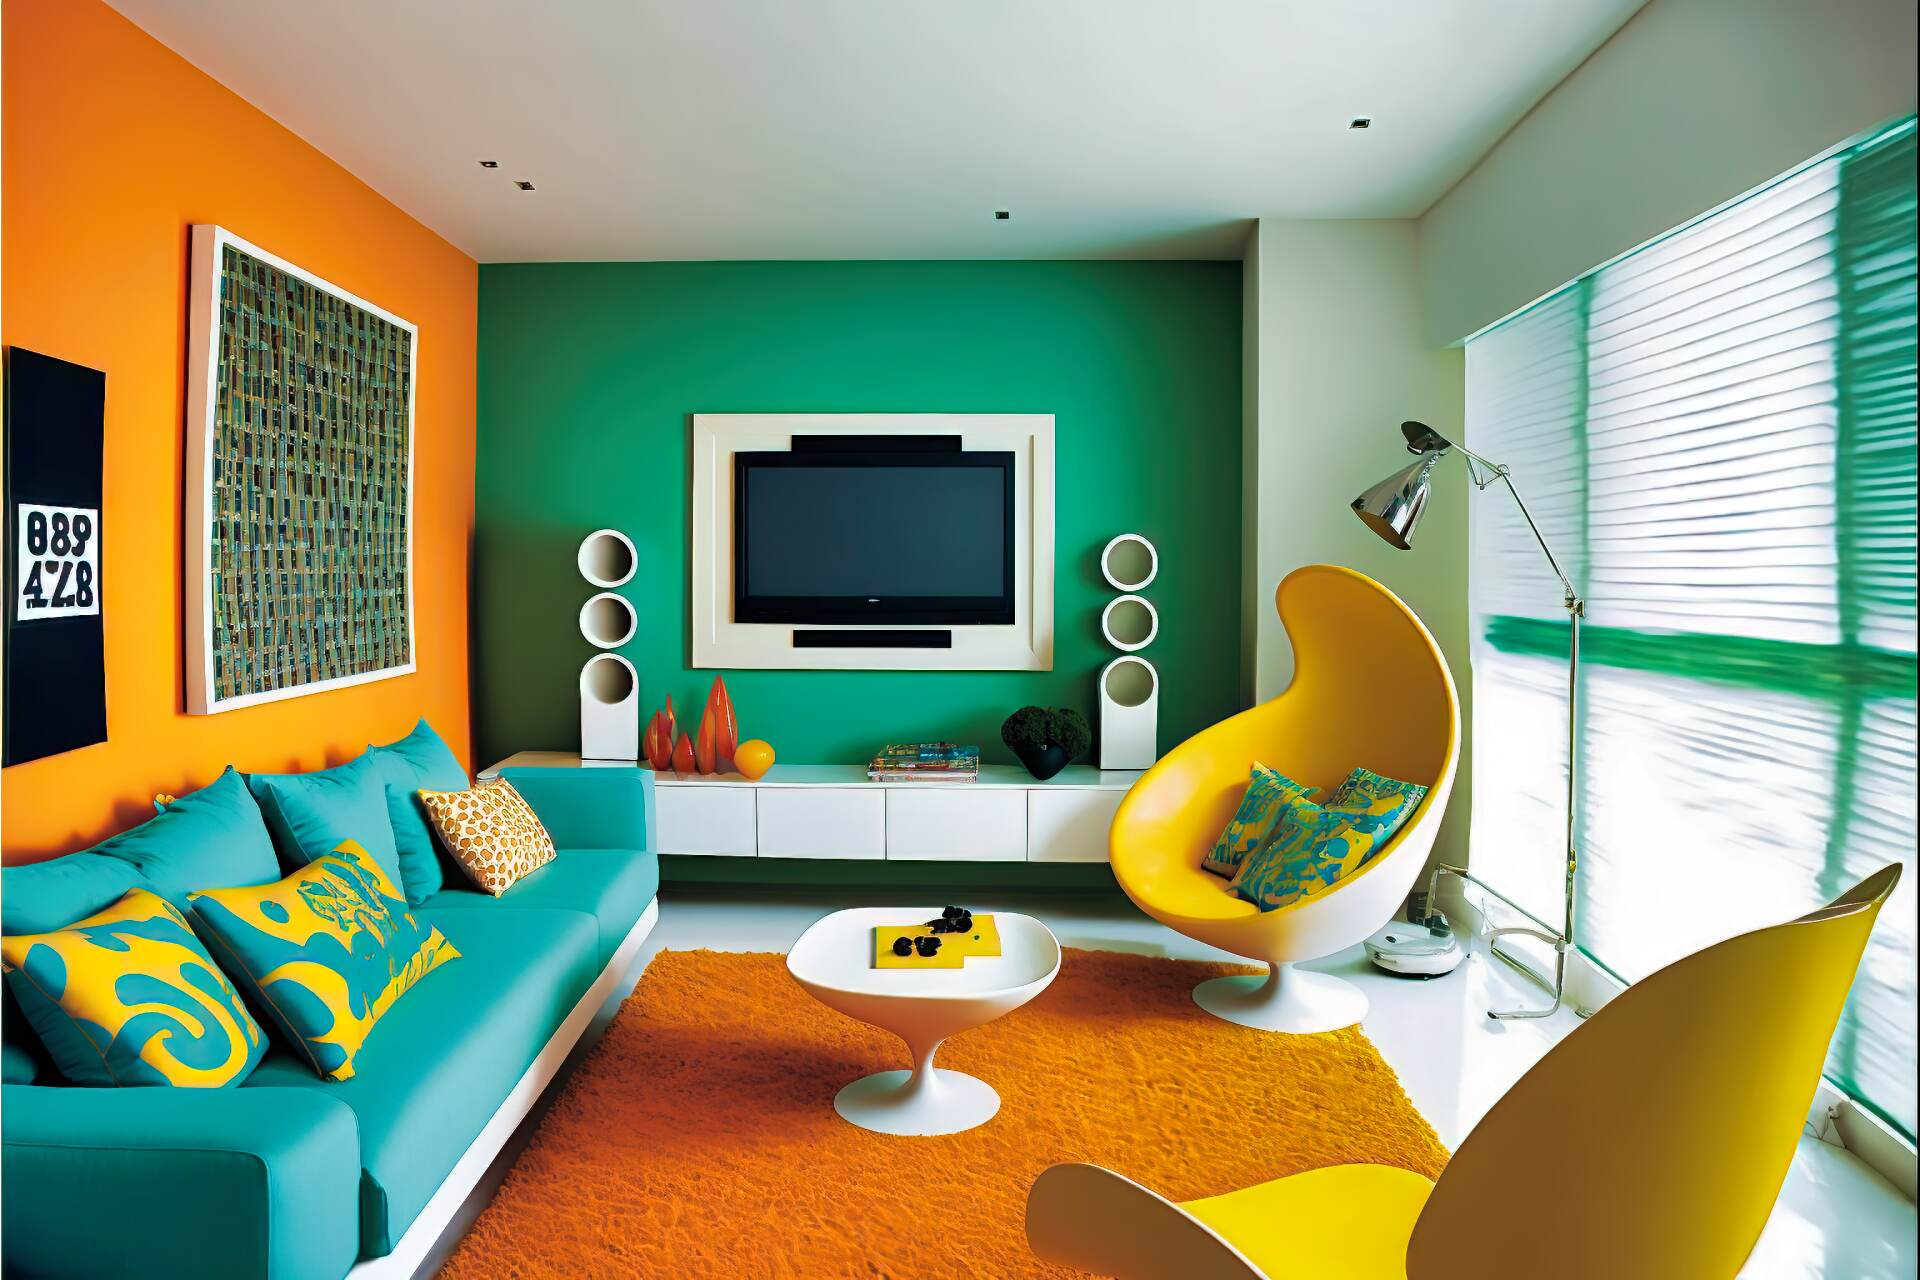 A Vibrant Futuristic Style Living Room With A Tropical Twist. The Walls Are Painted A Bright Yellow, With A Large Flat-Screen Tv Mounted On One Wall. A White, Modular Sofa Is Made Up Of Chaise Lounges And Armchairs. A Bright Orange Coffee Table And Blue Accent Chair Complete The Look. A Bright Green Patterned Rug Adds Texture And Colour. A Wall Of Windows Floods The Room With Natural Light.